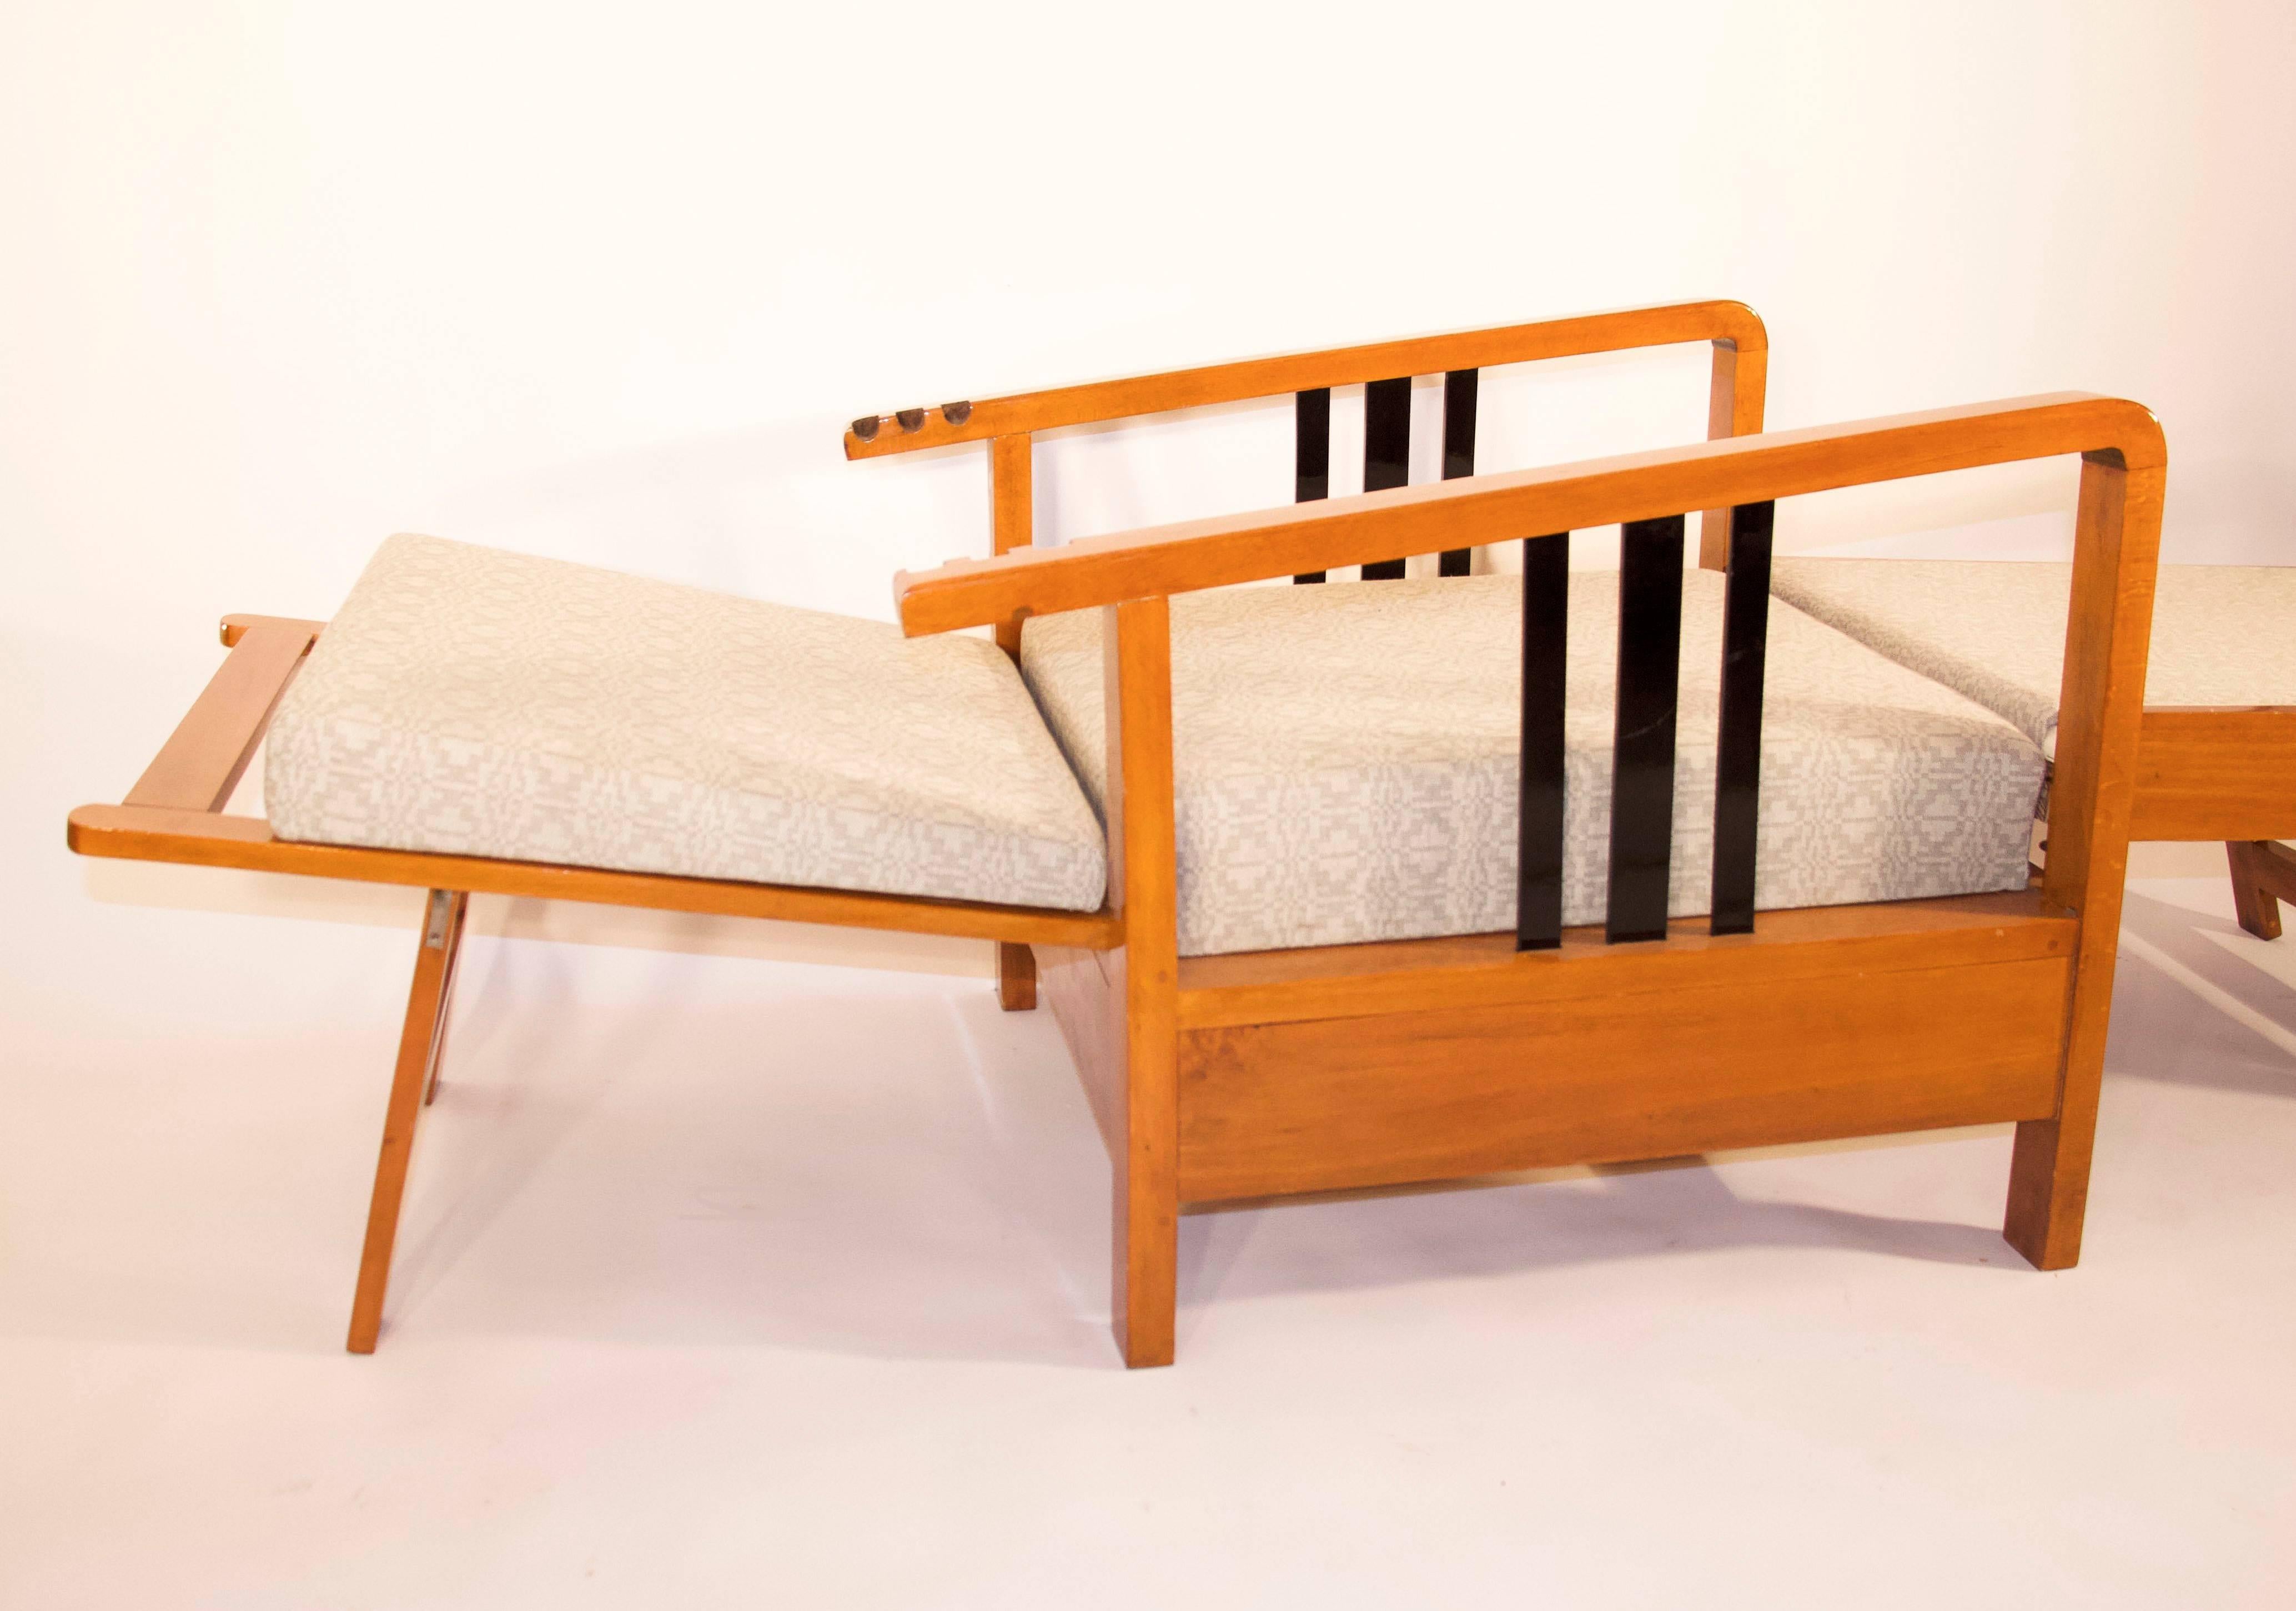 Rare, Kozma Lajos Art Deco Lounge Chair from the 1930s For Sale 2